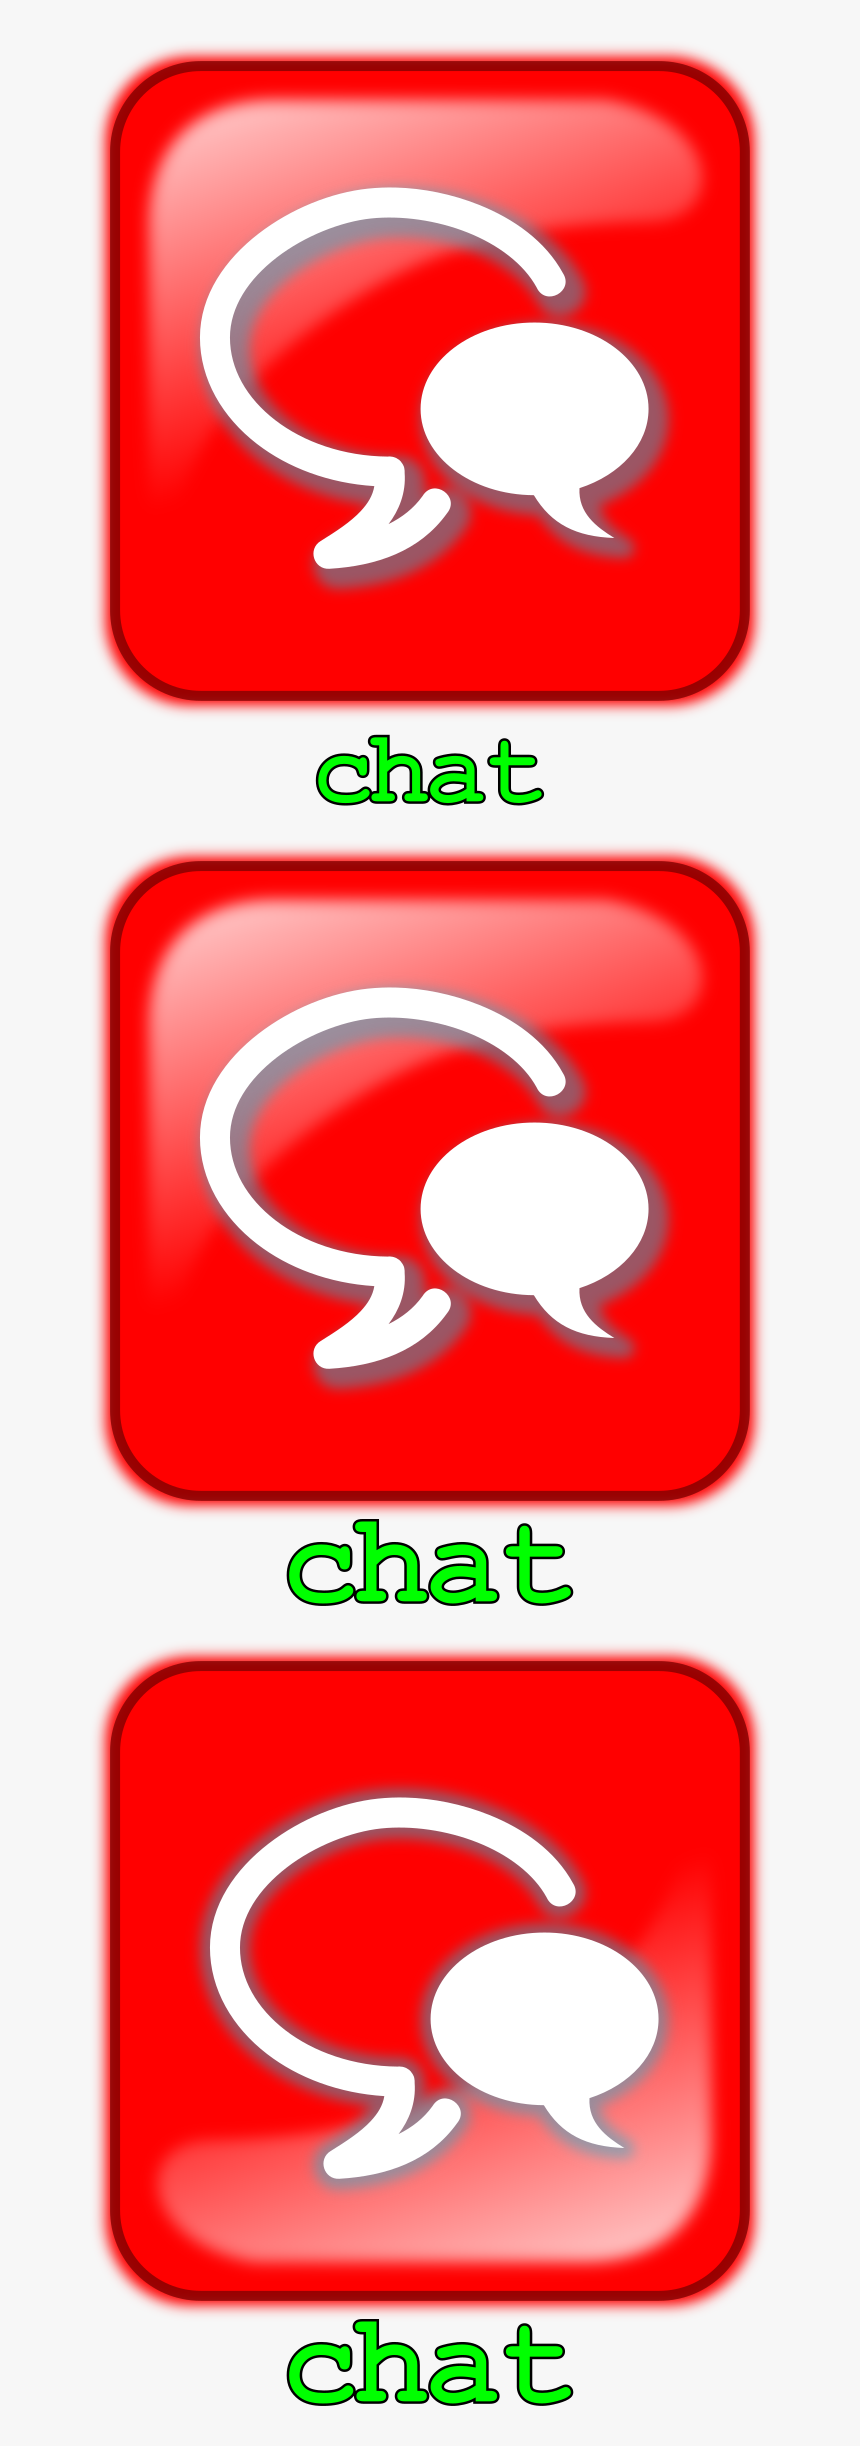 This Free Icons Png Design Of Botã³n Chat , Png Download, Transparent Png, Free Download